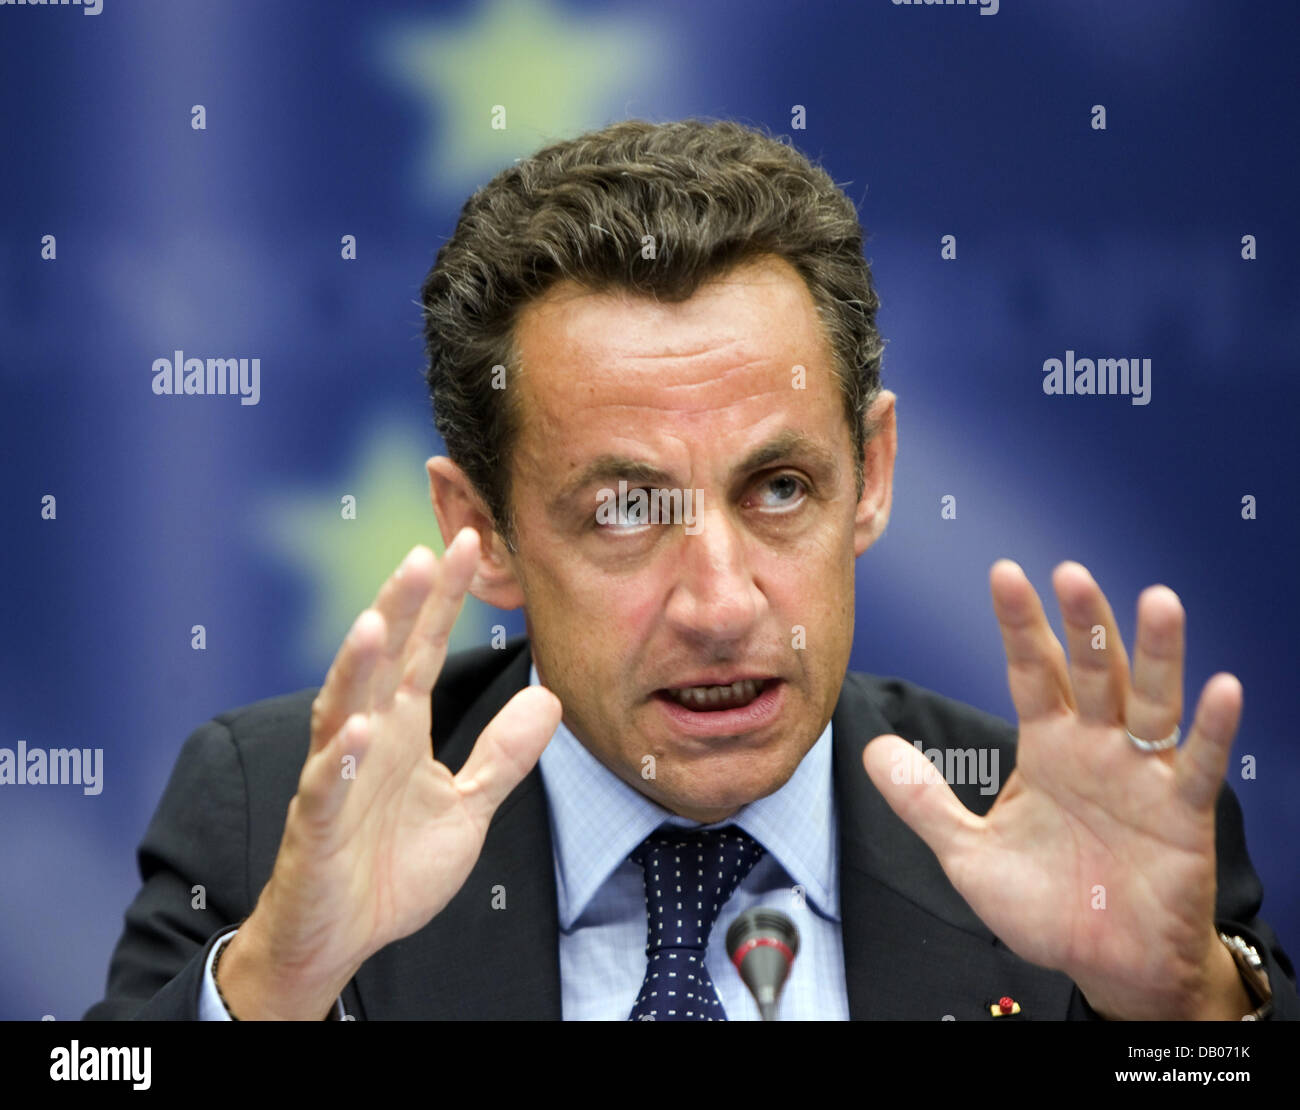 French President Nicolas Sarkozy pictured during a press conference at the EU headquarters in Brussels, Belgium, 09 July 2007. Photo: Thierry Monasse Stock Photo